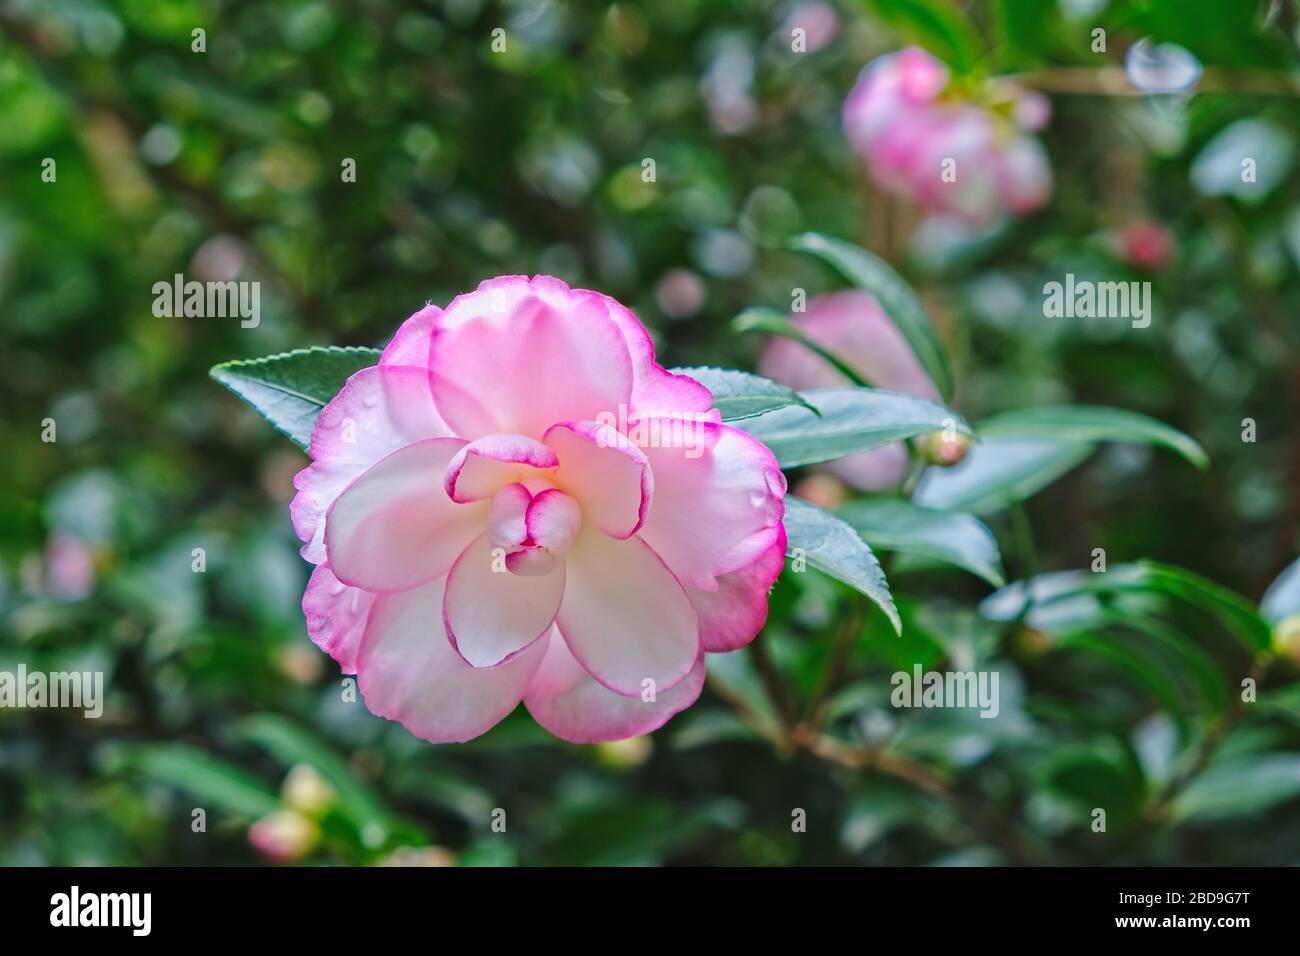 White and red Camellia flower surrounded by leaves and branches. Stock Photo